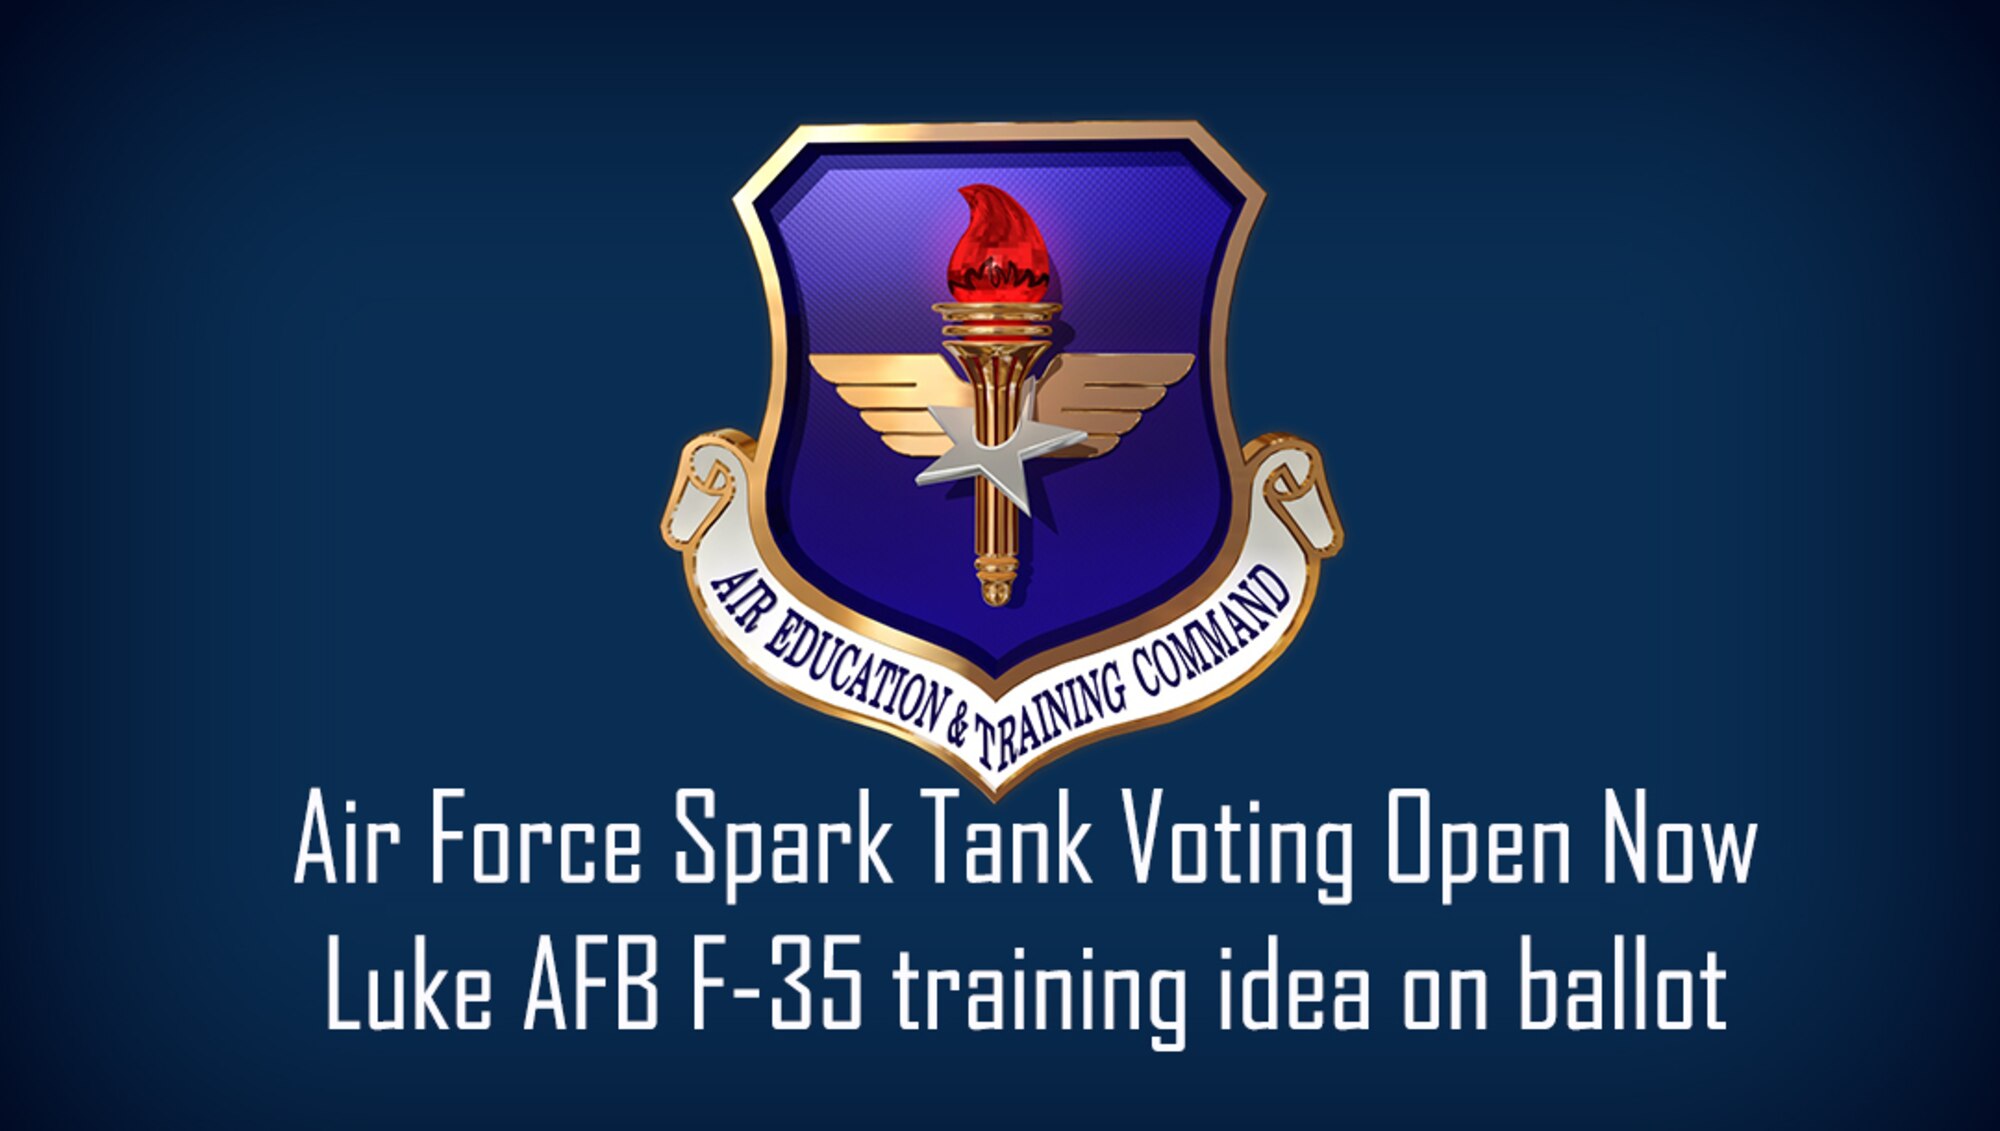 Voting for the 2020 Air Force Spark Tank competition is open from Feb. 20-28.  Spark Tank is an annual event hosted at the Air Force Association’s Warfare Symposium in Orlando, Florida where Airmen pitch innovative ideas to a panel of top Air Force leadership and industry experts.